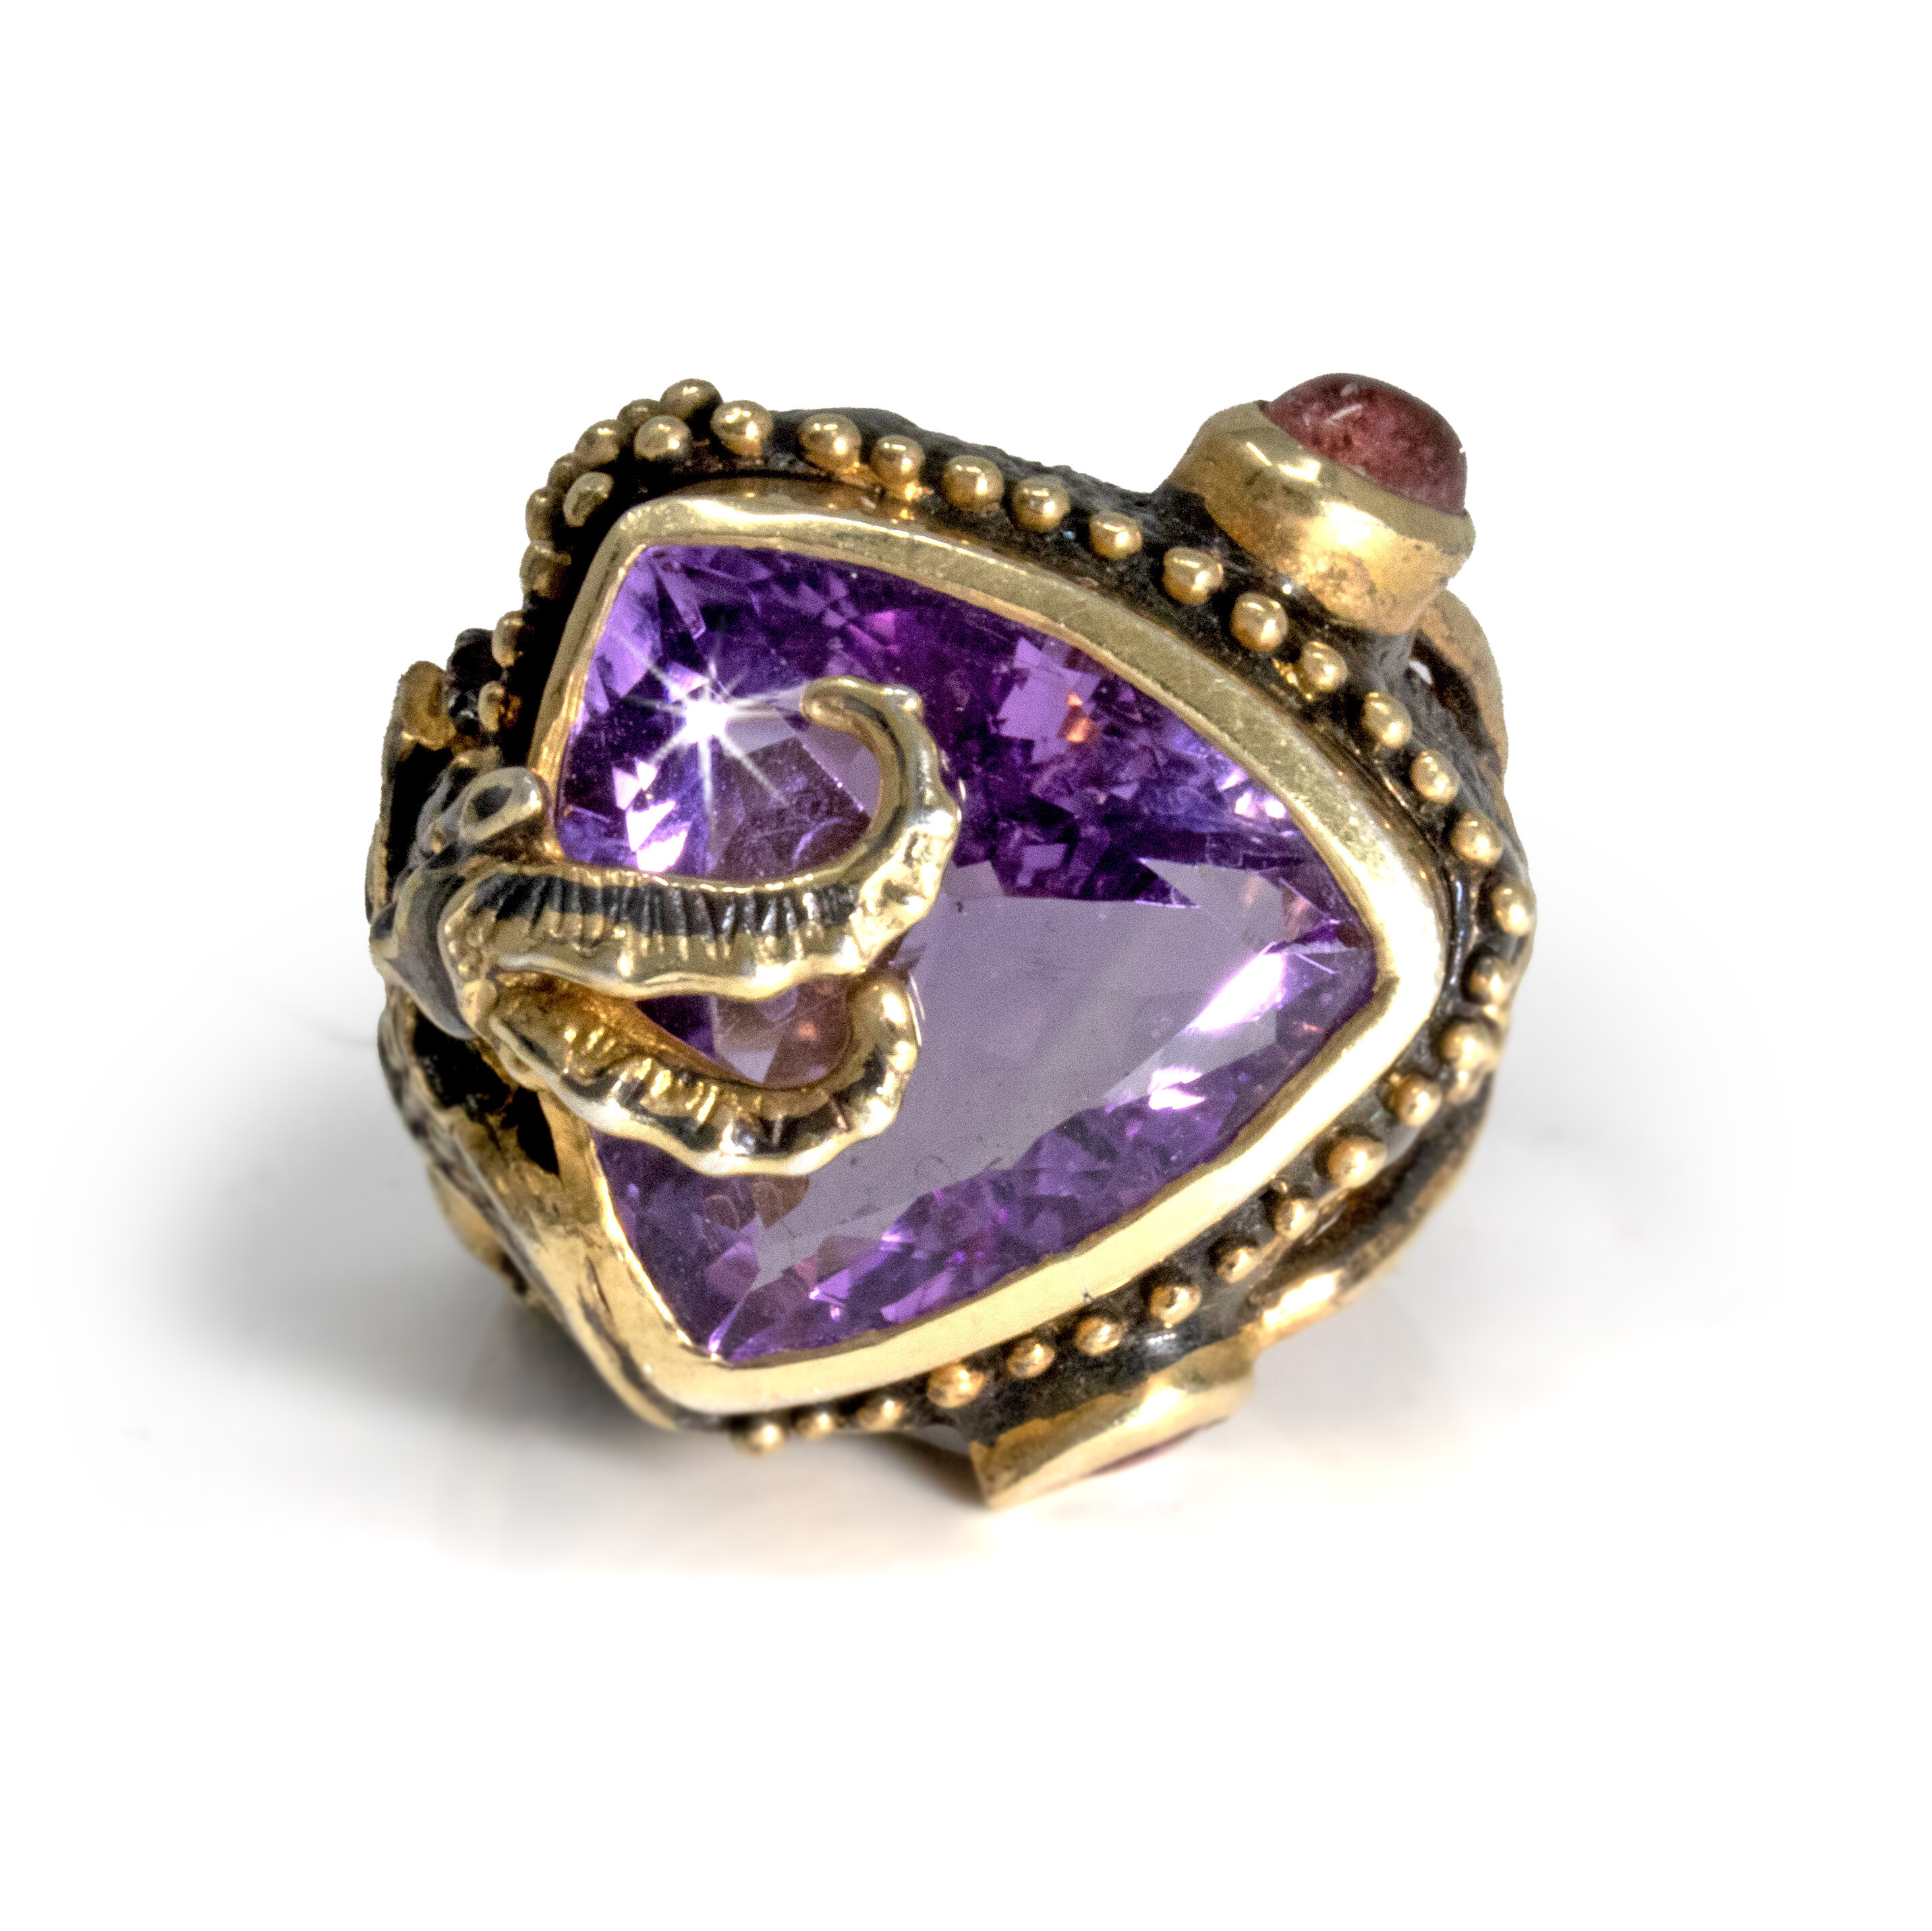 Amethyst Ring Trillion With Oval Pink Tourmaline Cabochon  Chimera Gold Vermeil Size 7 5